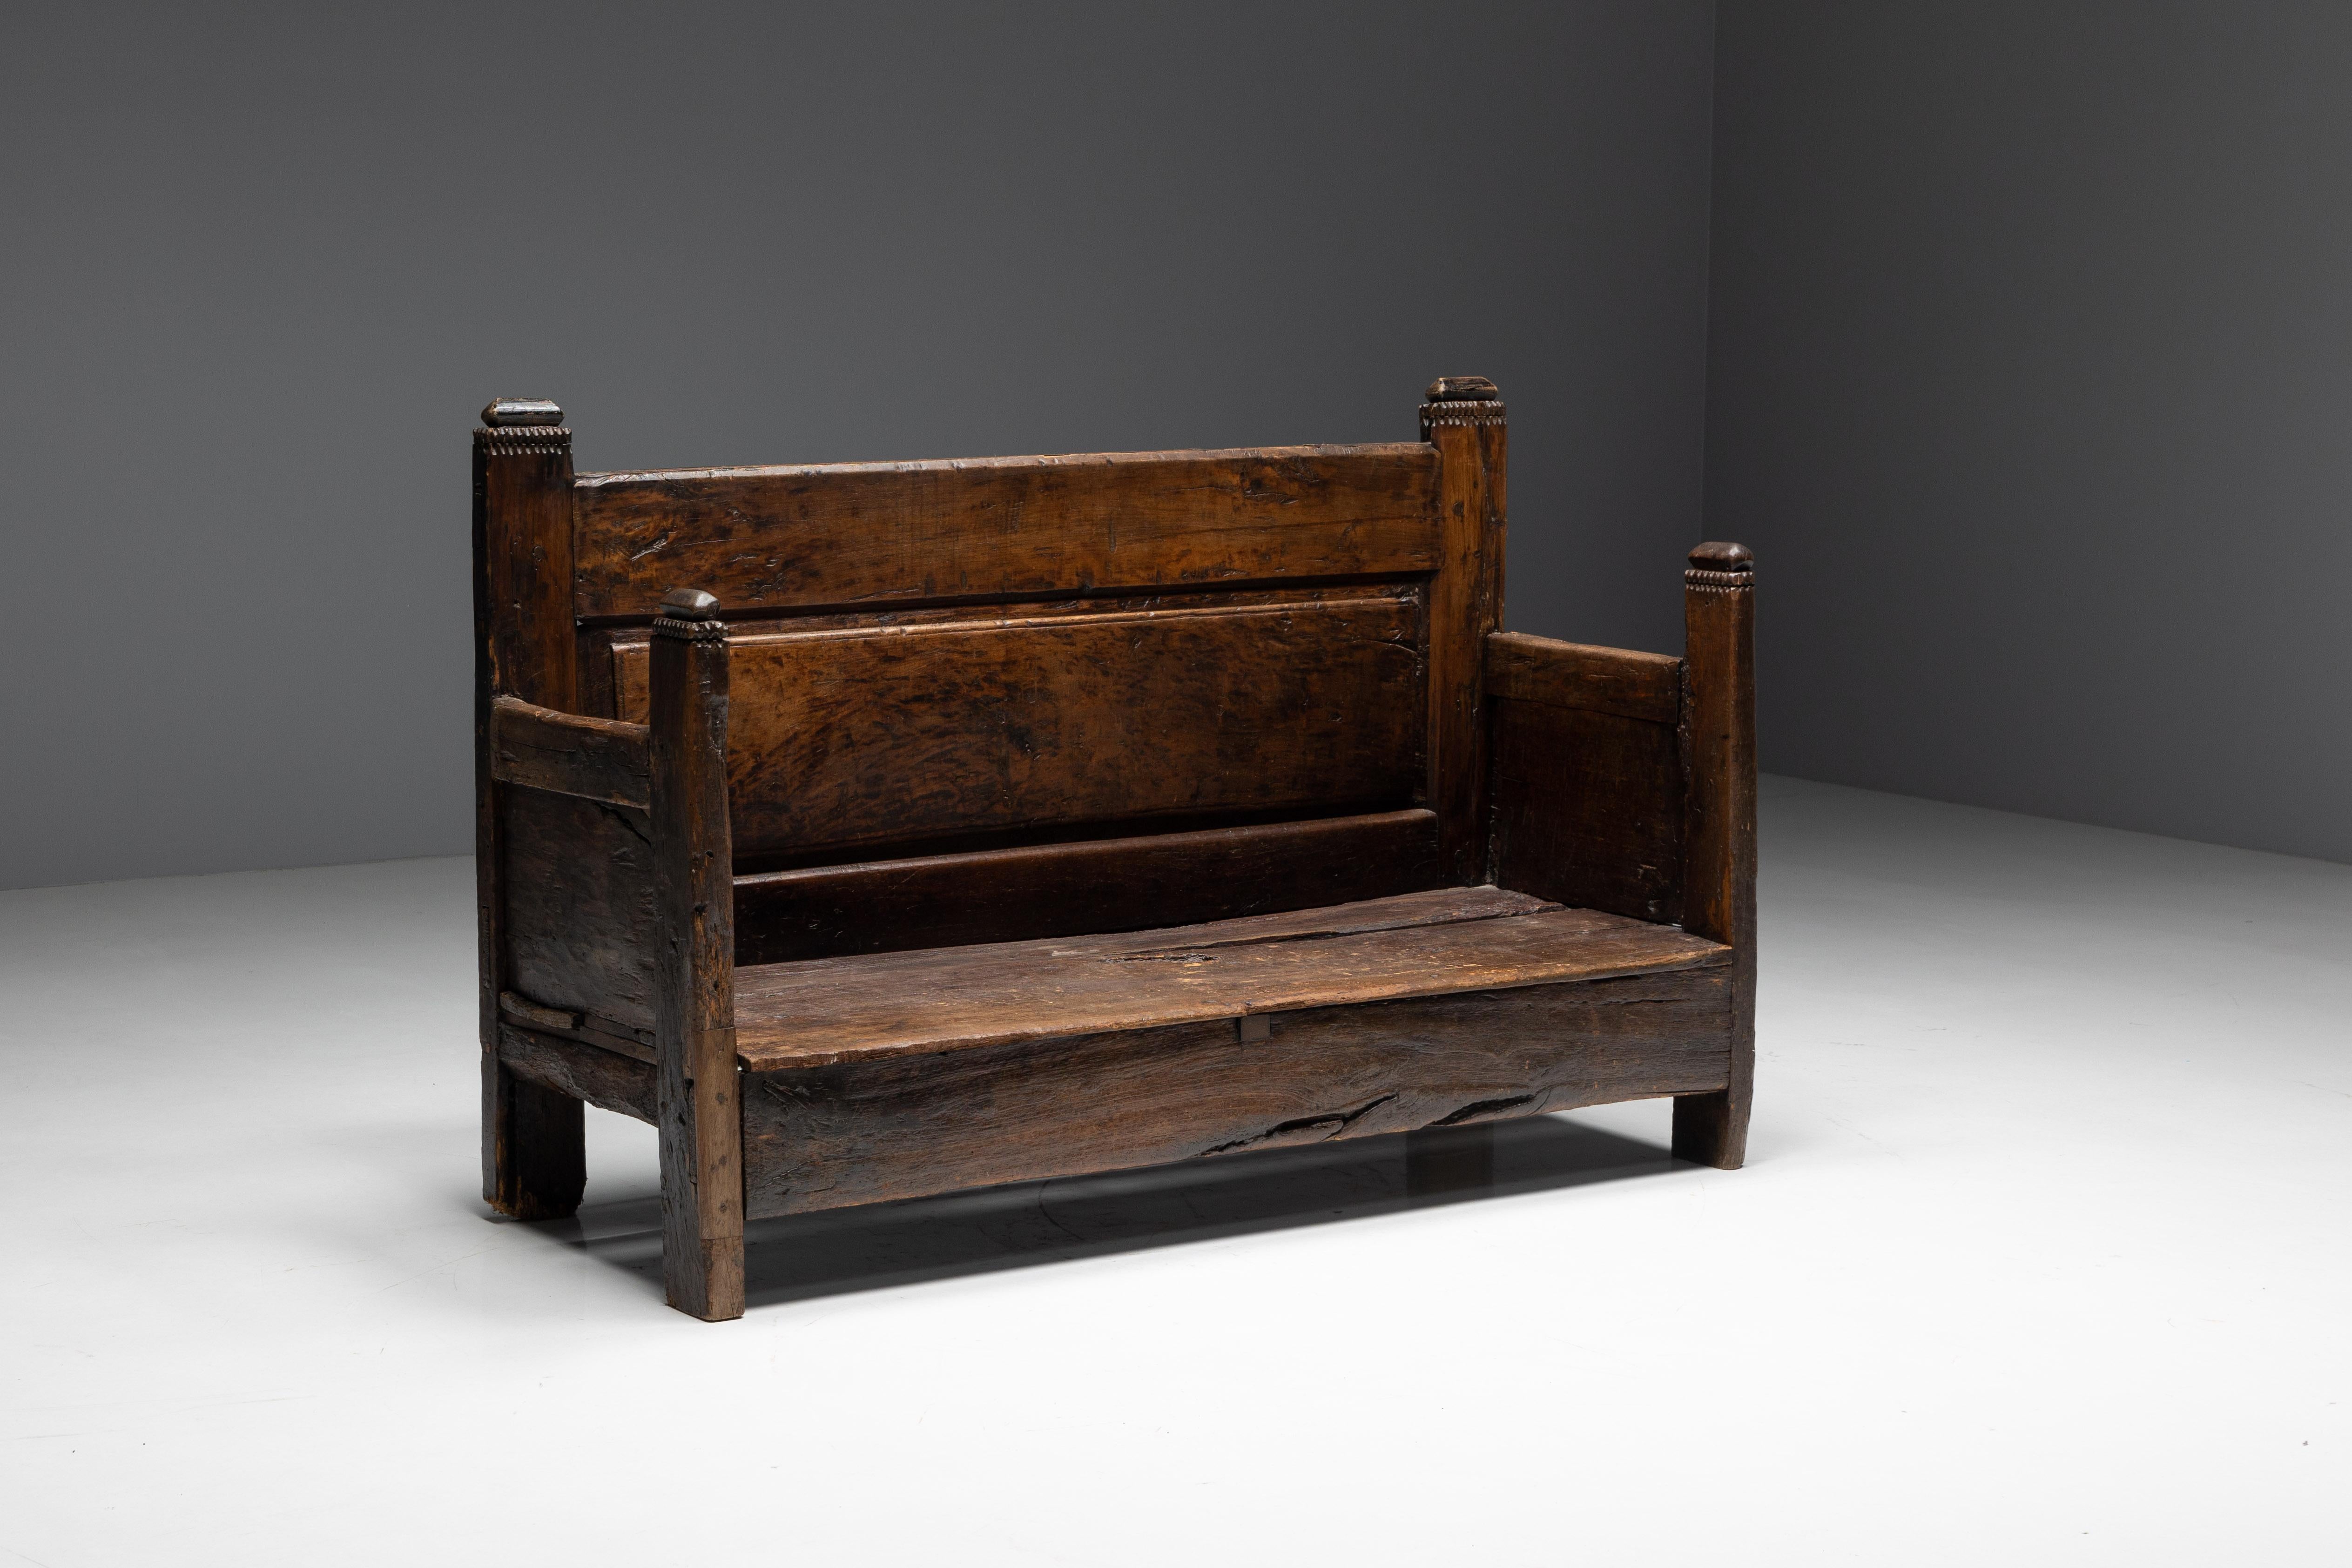 Wood Rustic Art Populaire Bench, France, 19th Century For Sale